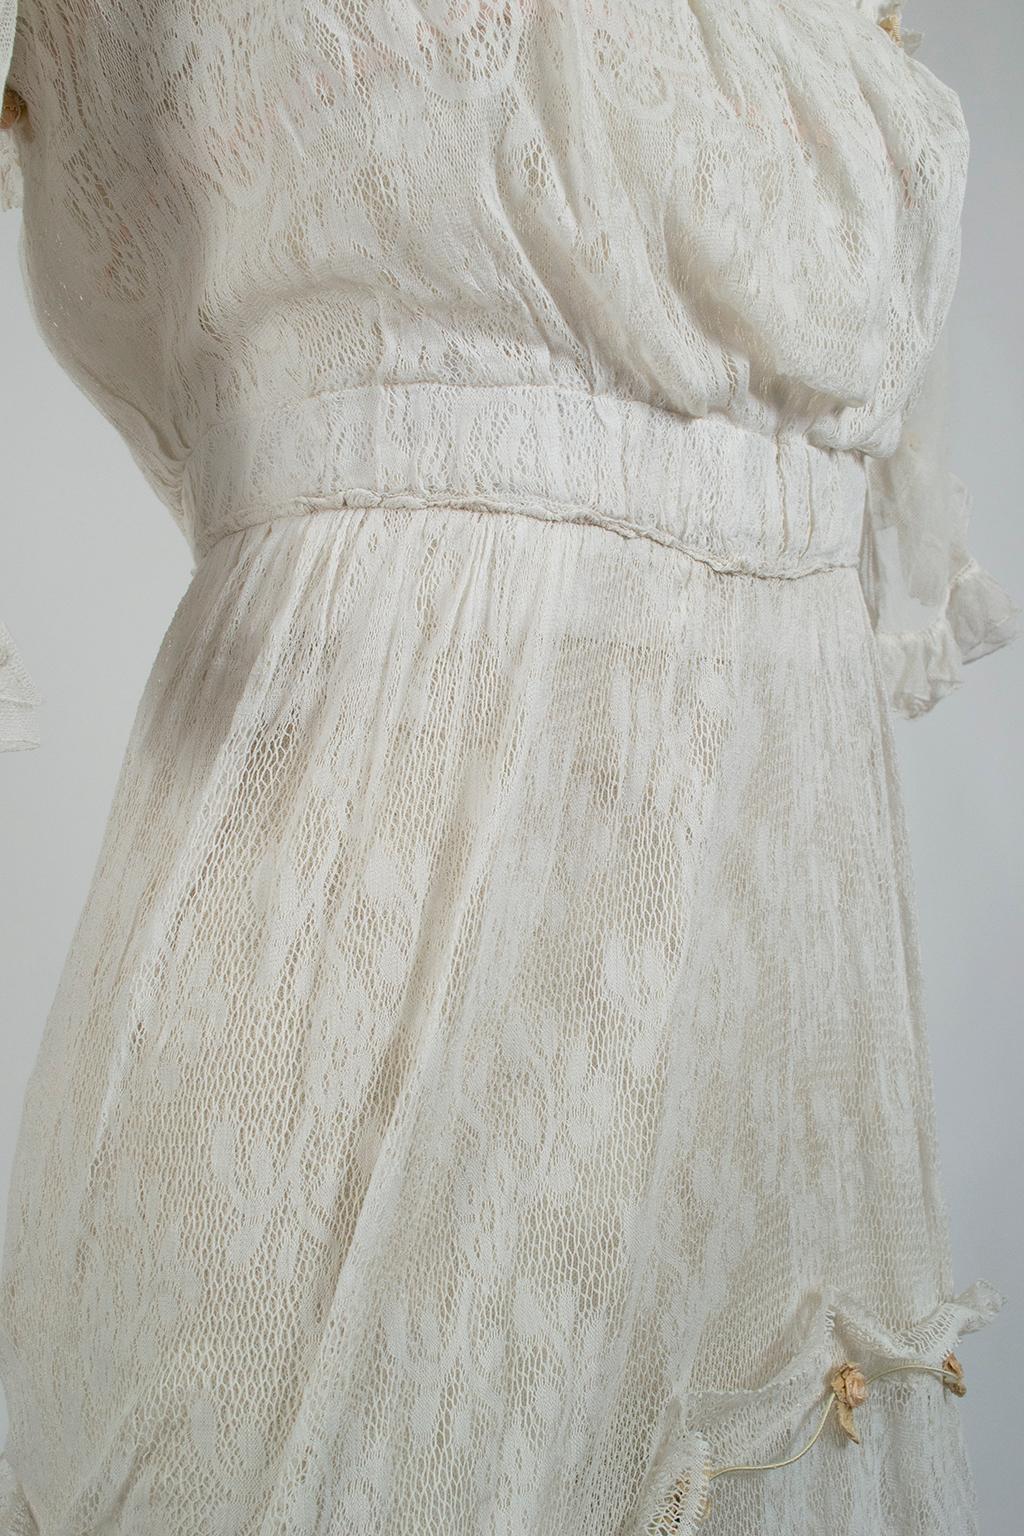 White Edwardian Net Rosebud Afternoon Tea or Bridal Gown - XXS, Early 1900s For Sale 8